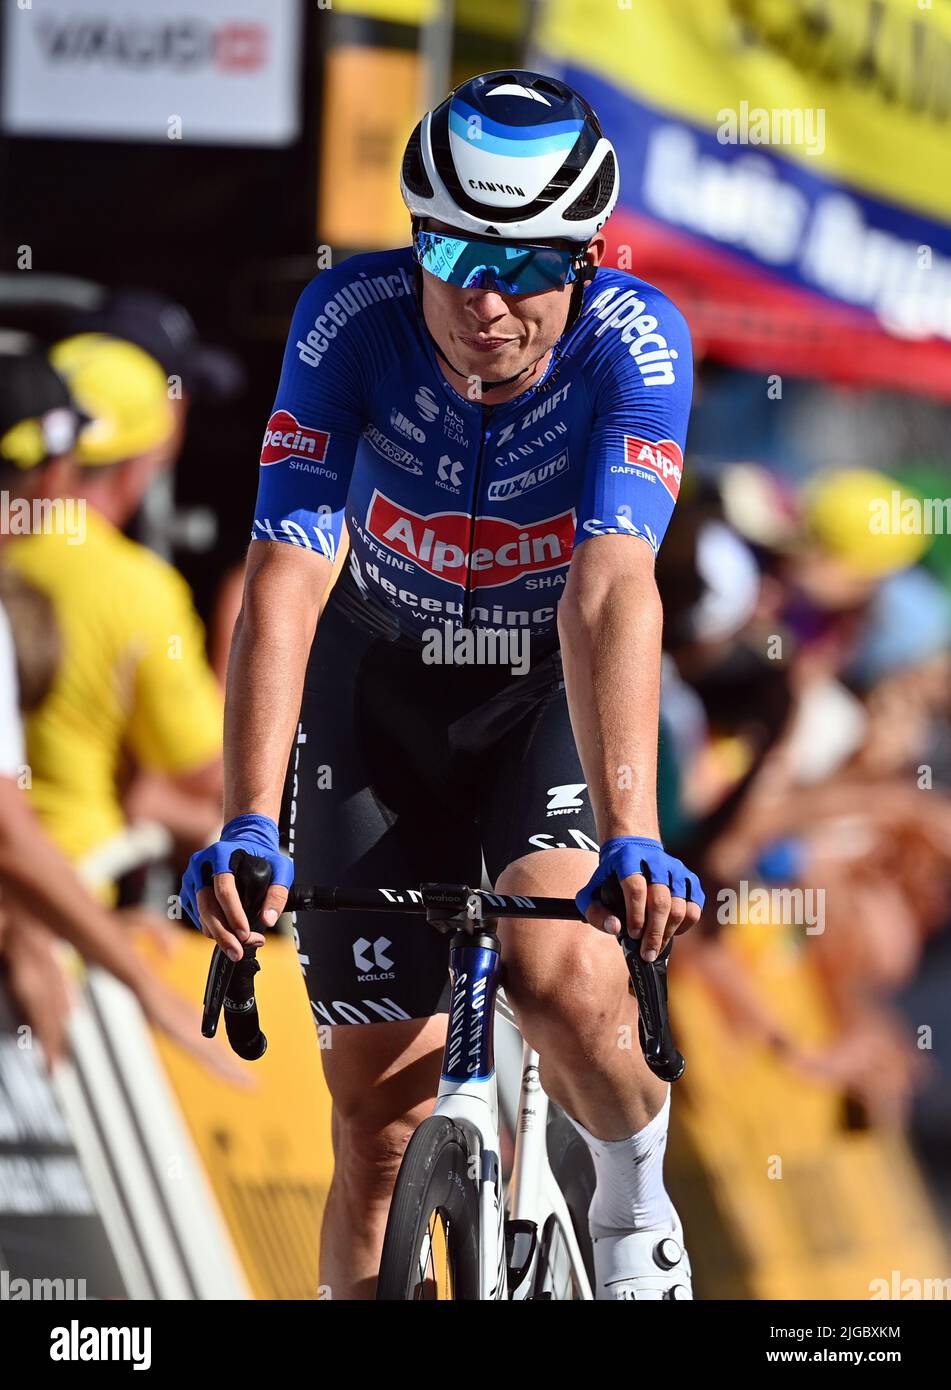 Belgian Jasper Philipsen of Alpecin-Deceuninck pictured after stage eight of the Tour de France cycling race, a 184km race from Dole, France, to Lausanne, Switzerland, on Saturday 09 July 2022. This year's Tour de France takes place from 01 to 24 July 2022. BELGA PHOTO POOL DAVID STOCKMAN - UK OUT Stock Photo